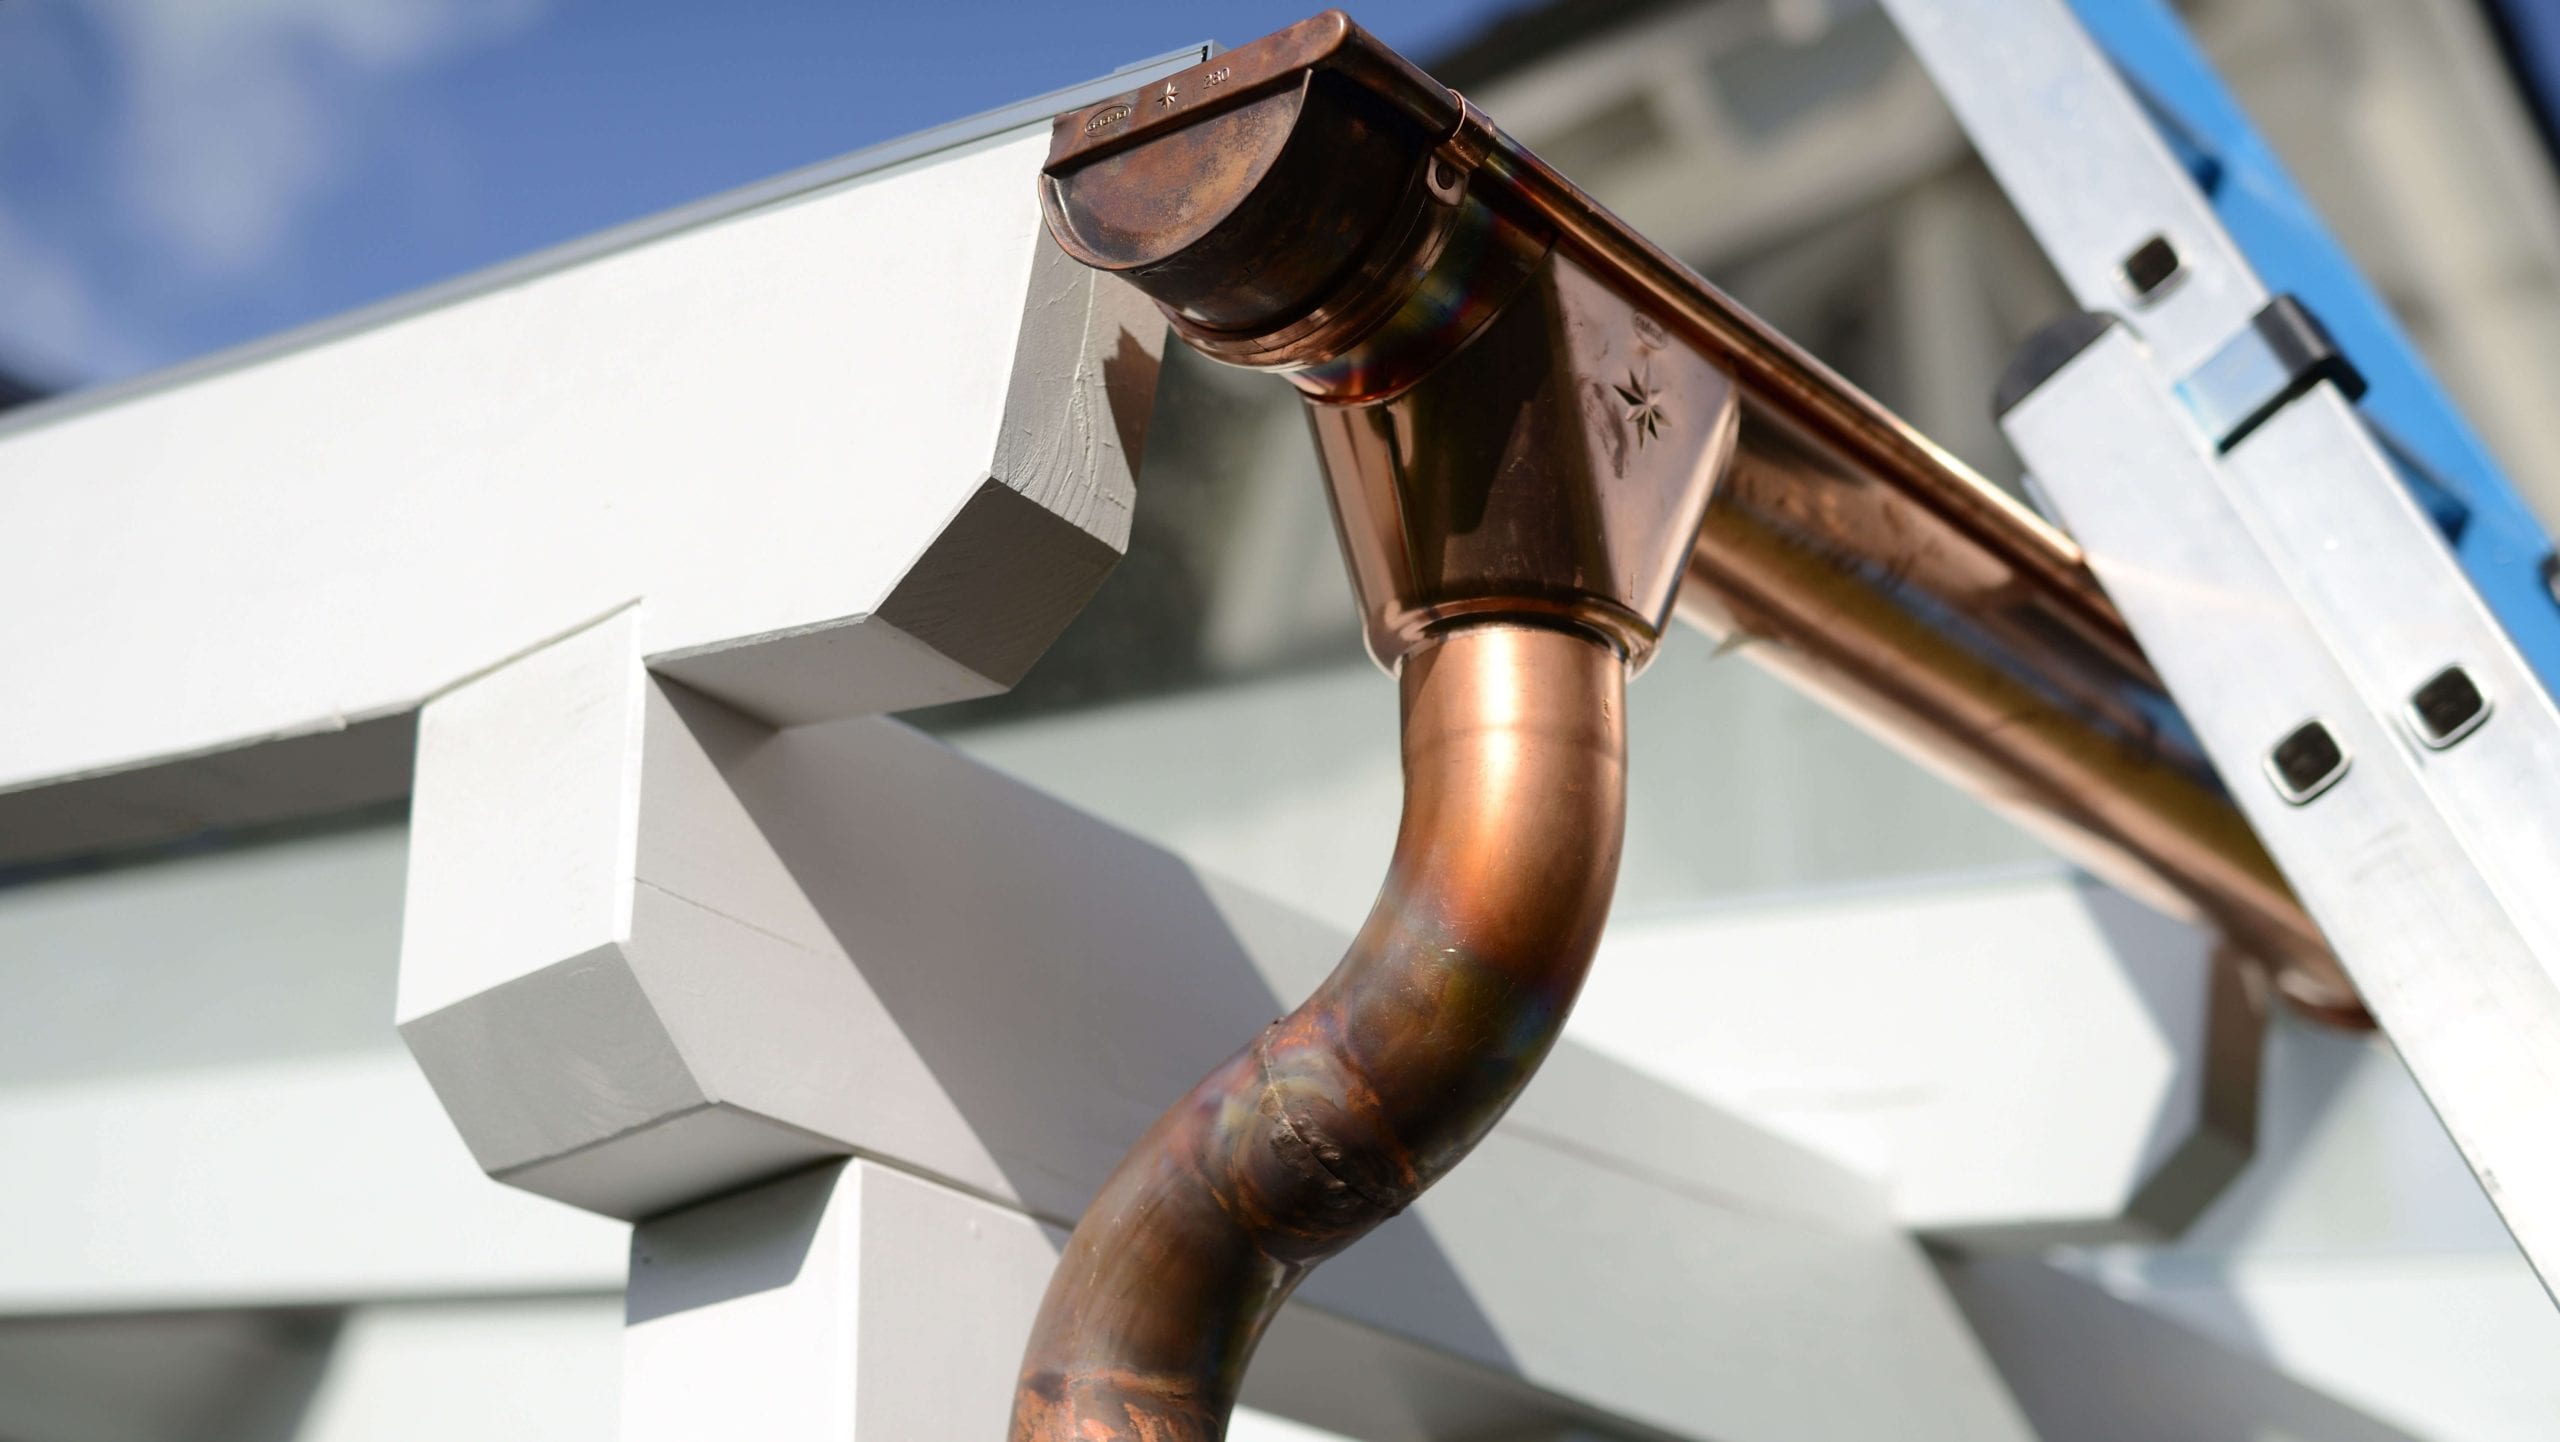 Make your property stand out with copper gutters. Contact for gutter installation in Fort Mill